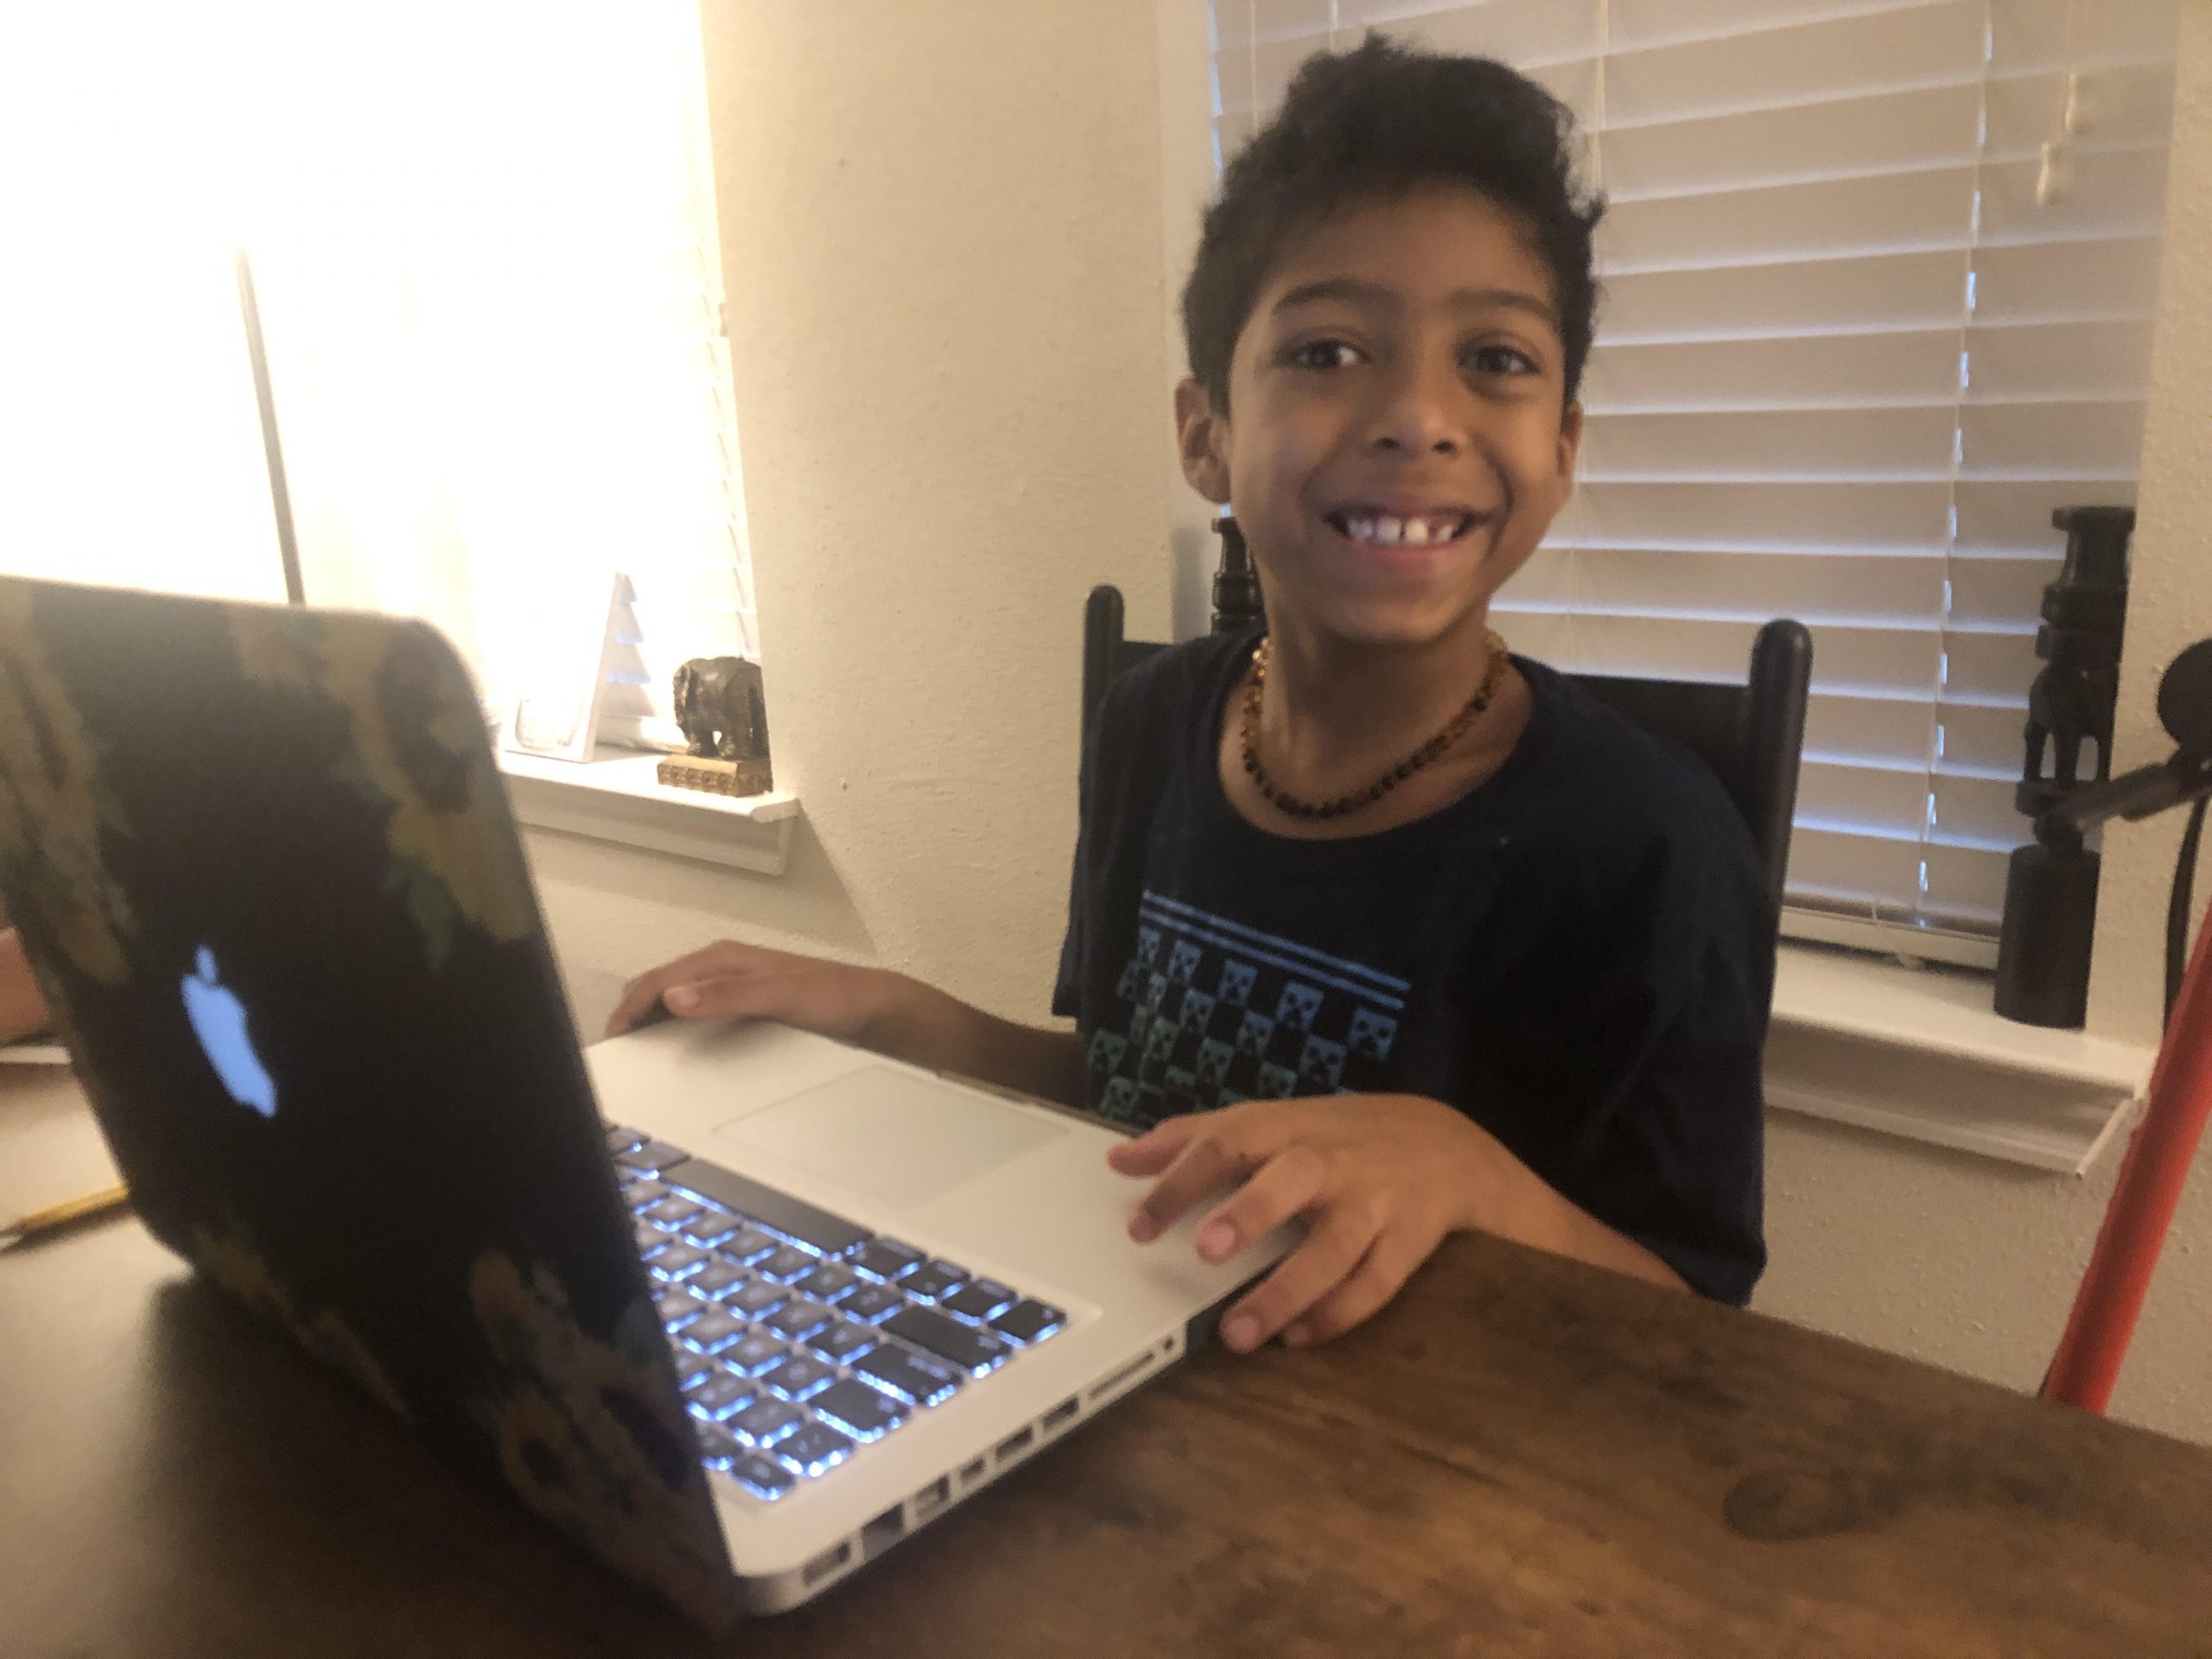 Young boy smiling while he works on laptop